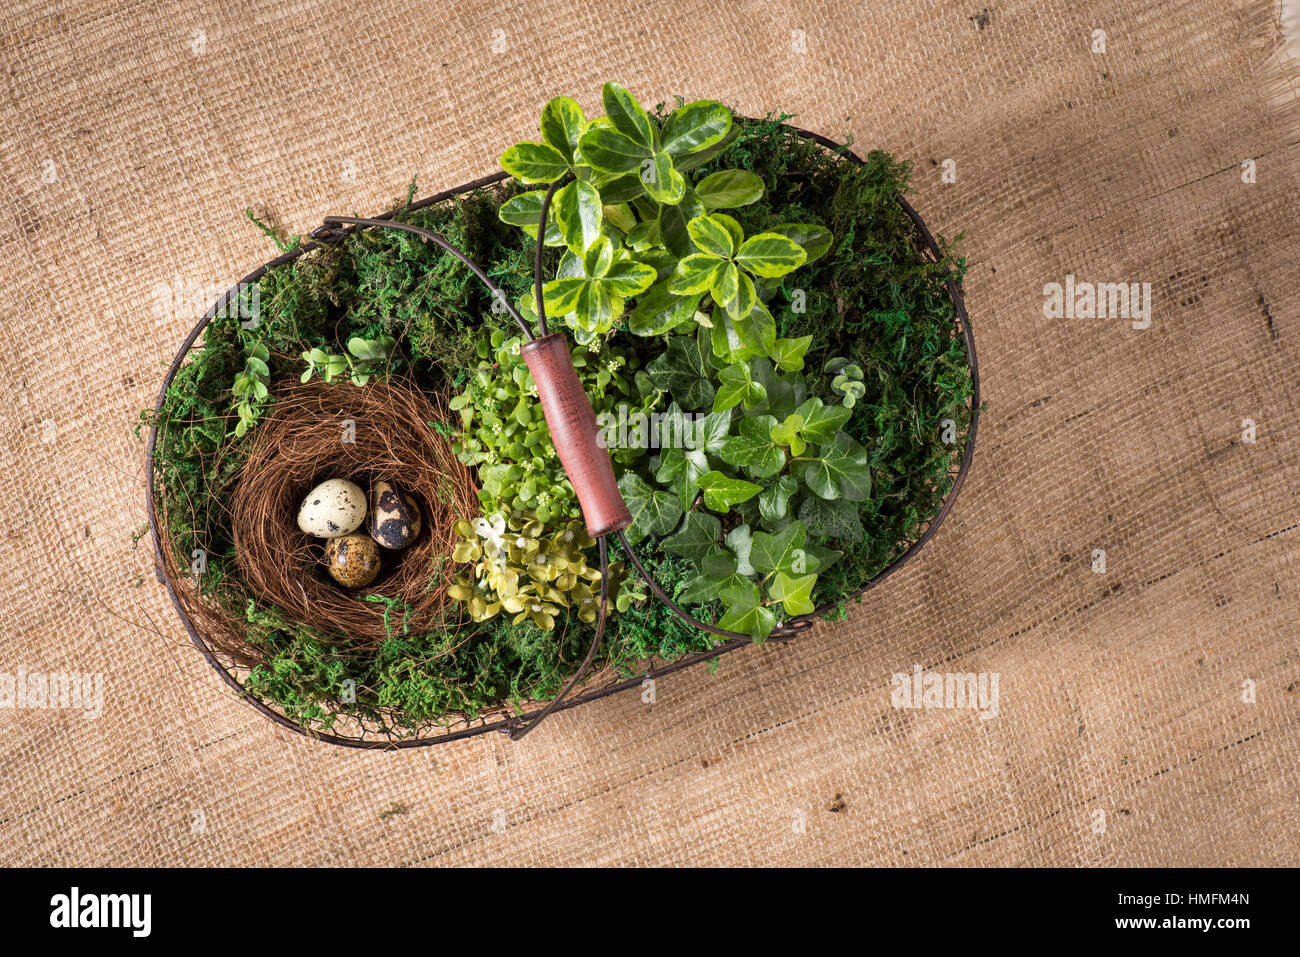 Basket with plants and eggs Stock Photo